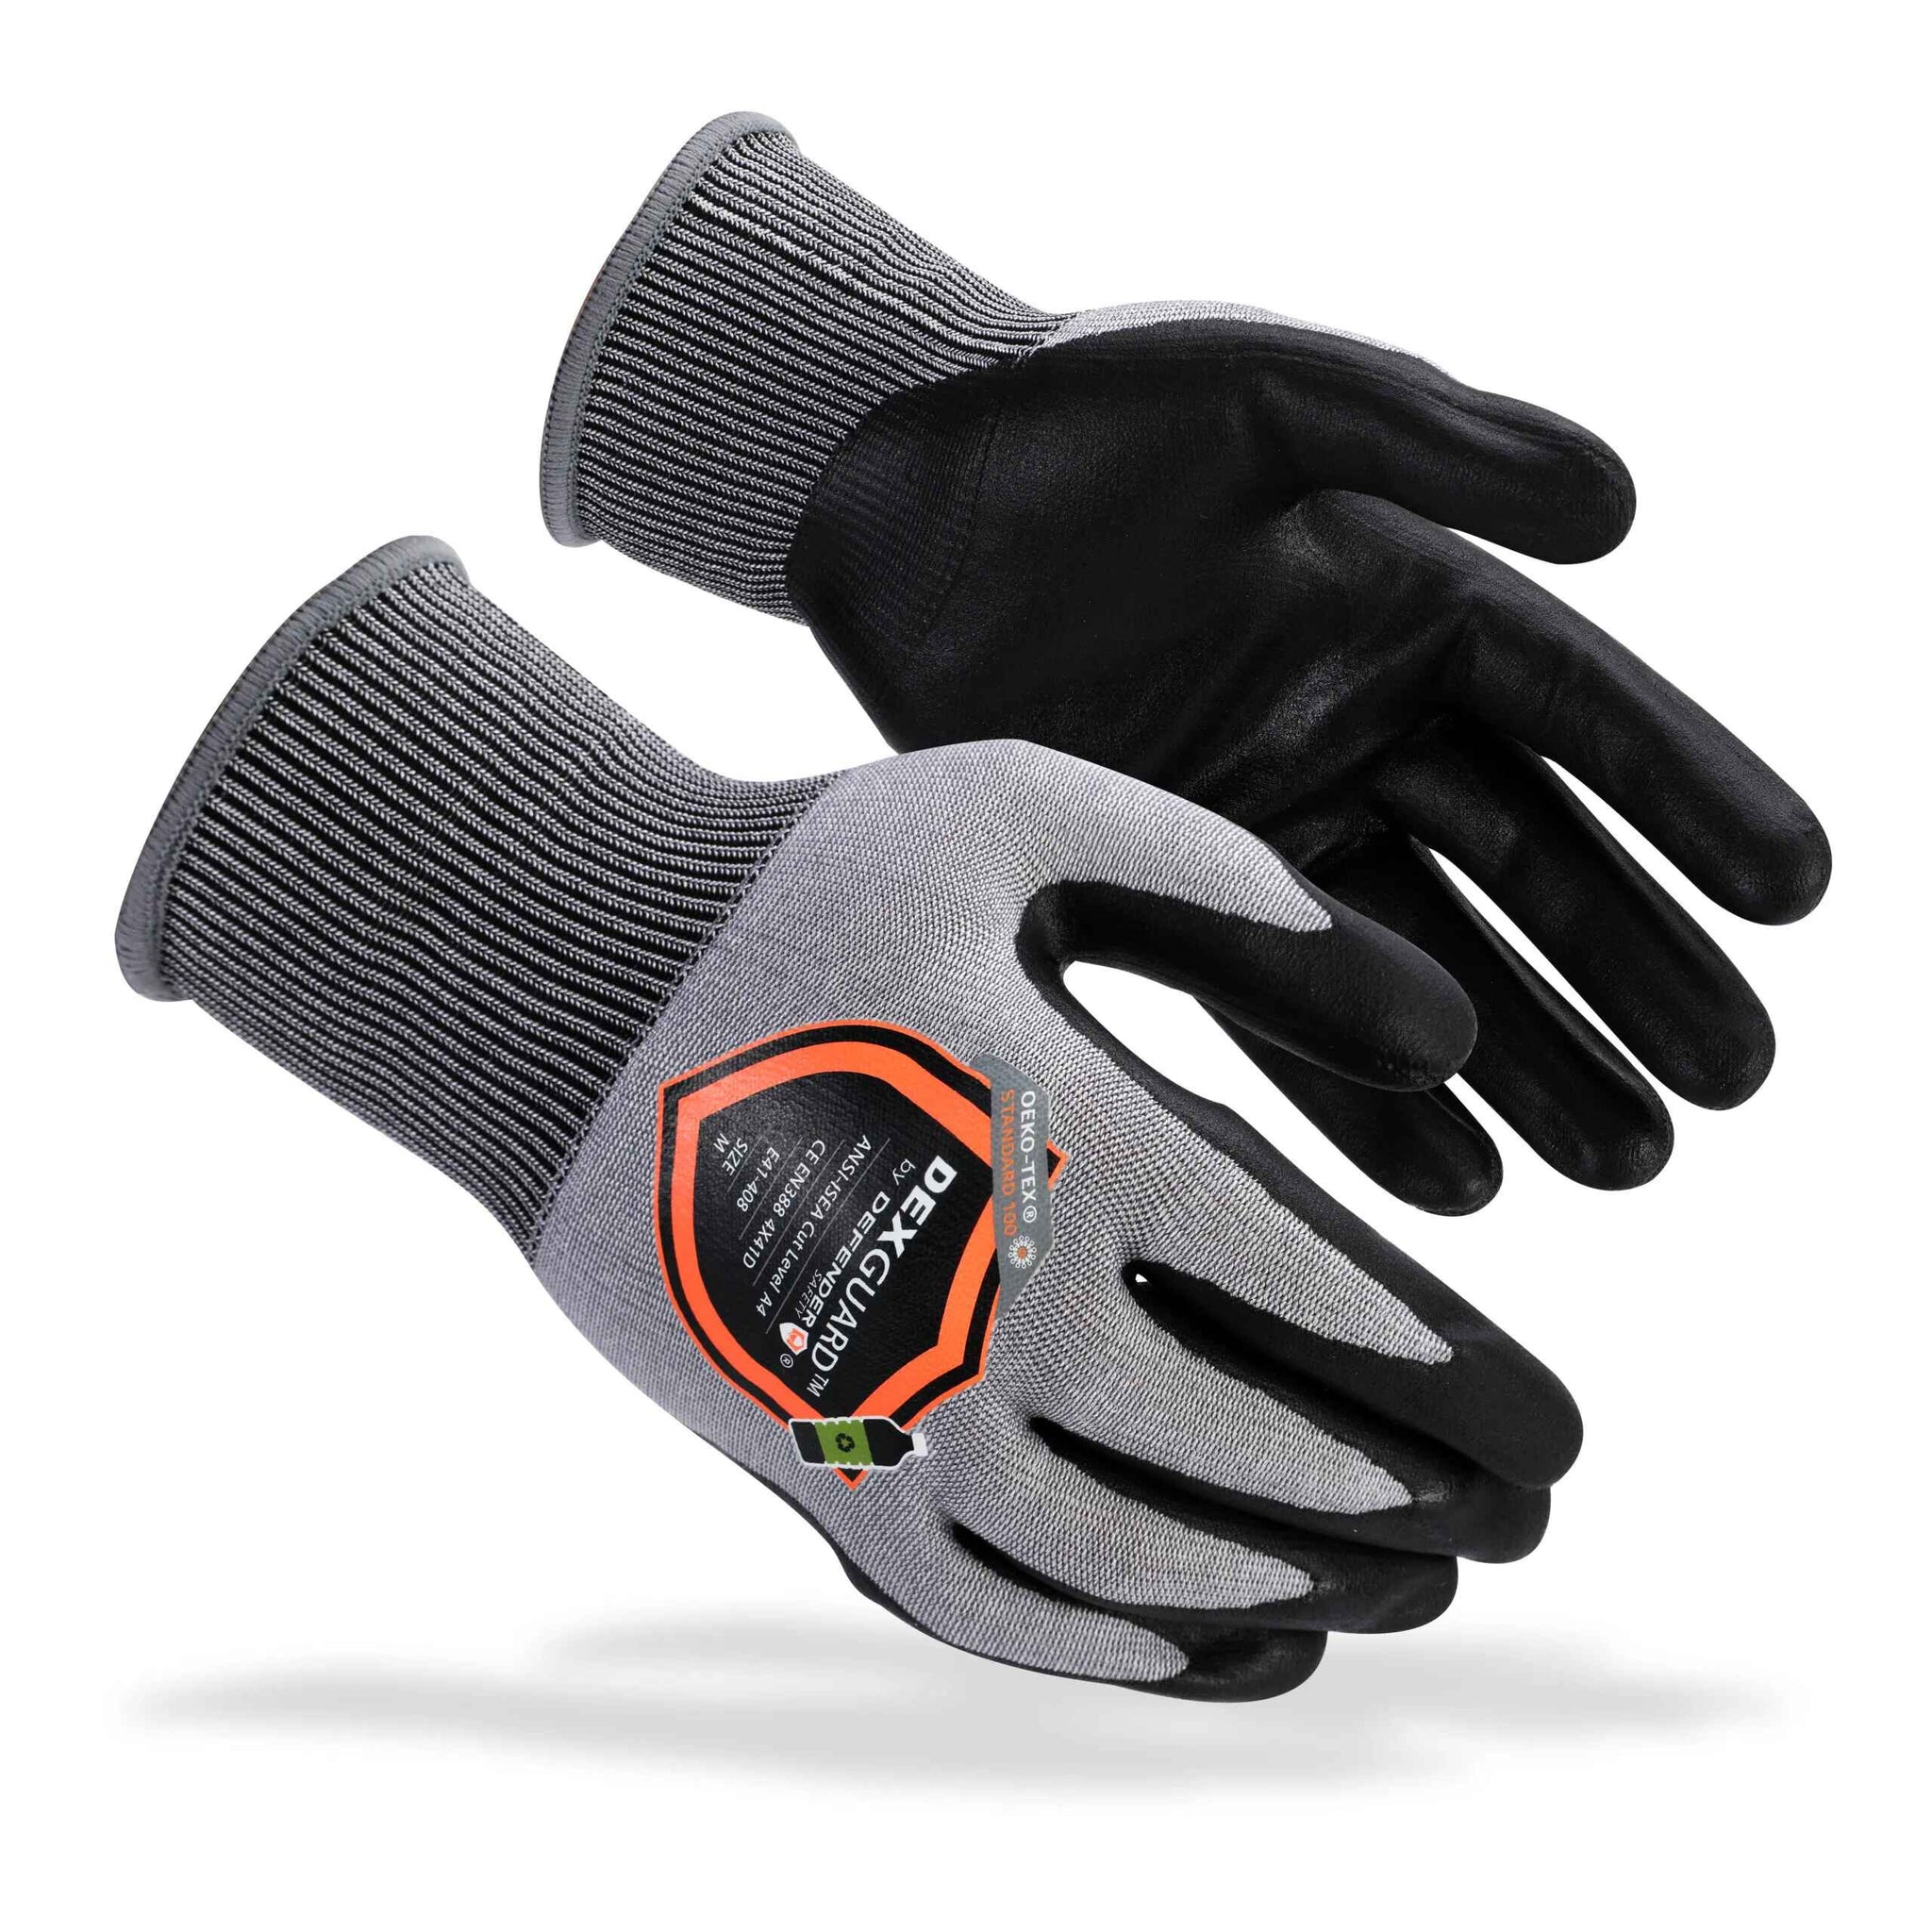 A6 Cut Resistant Gloves, Level 4 Abrasion Resistant, Textured Nitrile Coating, Touch Screen Compatible DEXGUARD, 2XL / 1 Pair